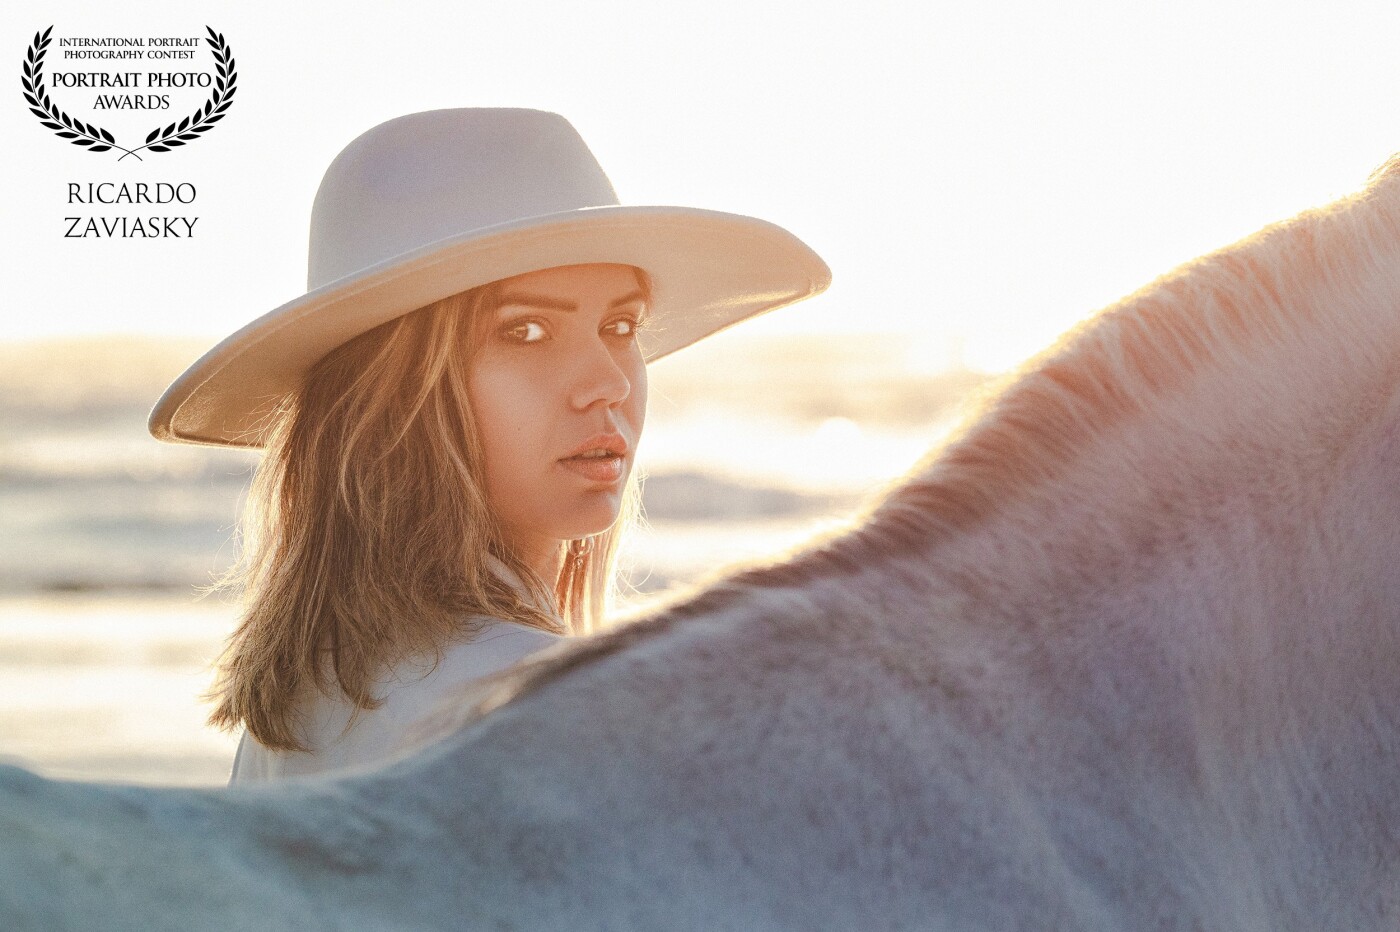 This photo was taken in the first rays of the Sun on an almost deserted beach, taking advantage of the sunlight to compose the scene between the model and the horse. Special thanks to model Ketherin for believing in our work and to Haras São Francisco, who provided us with such wonderful horses.